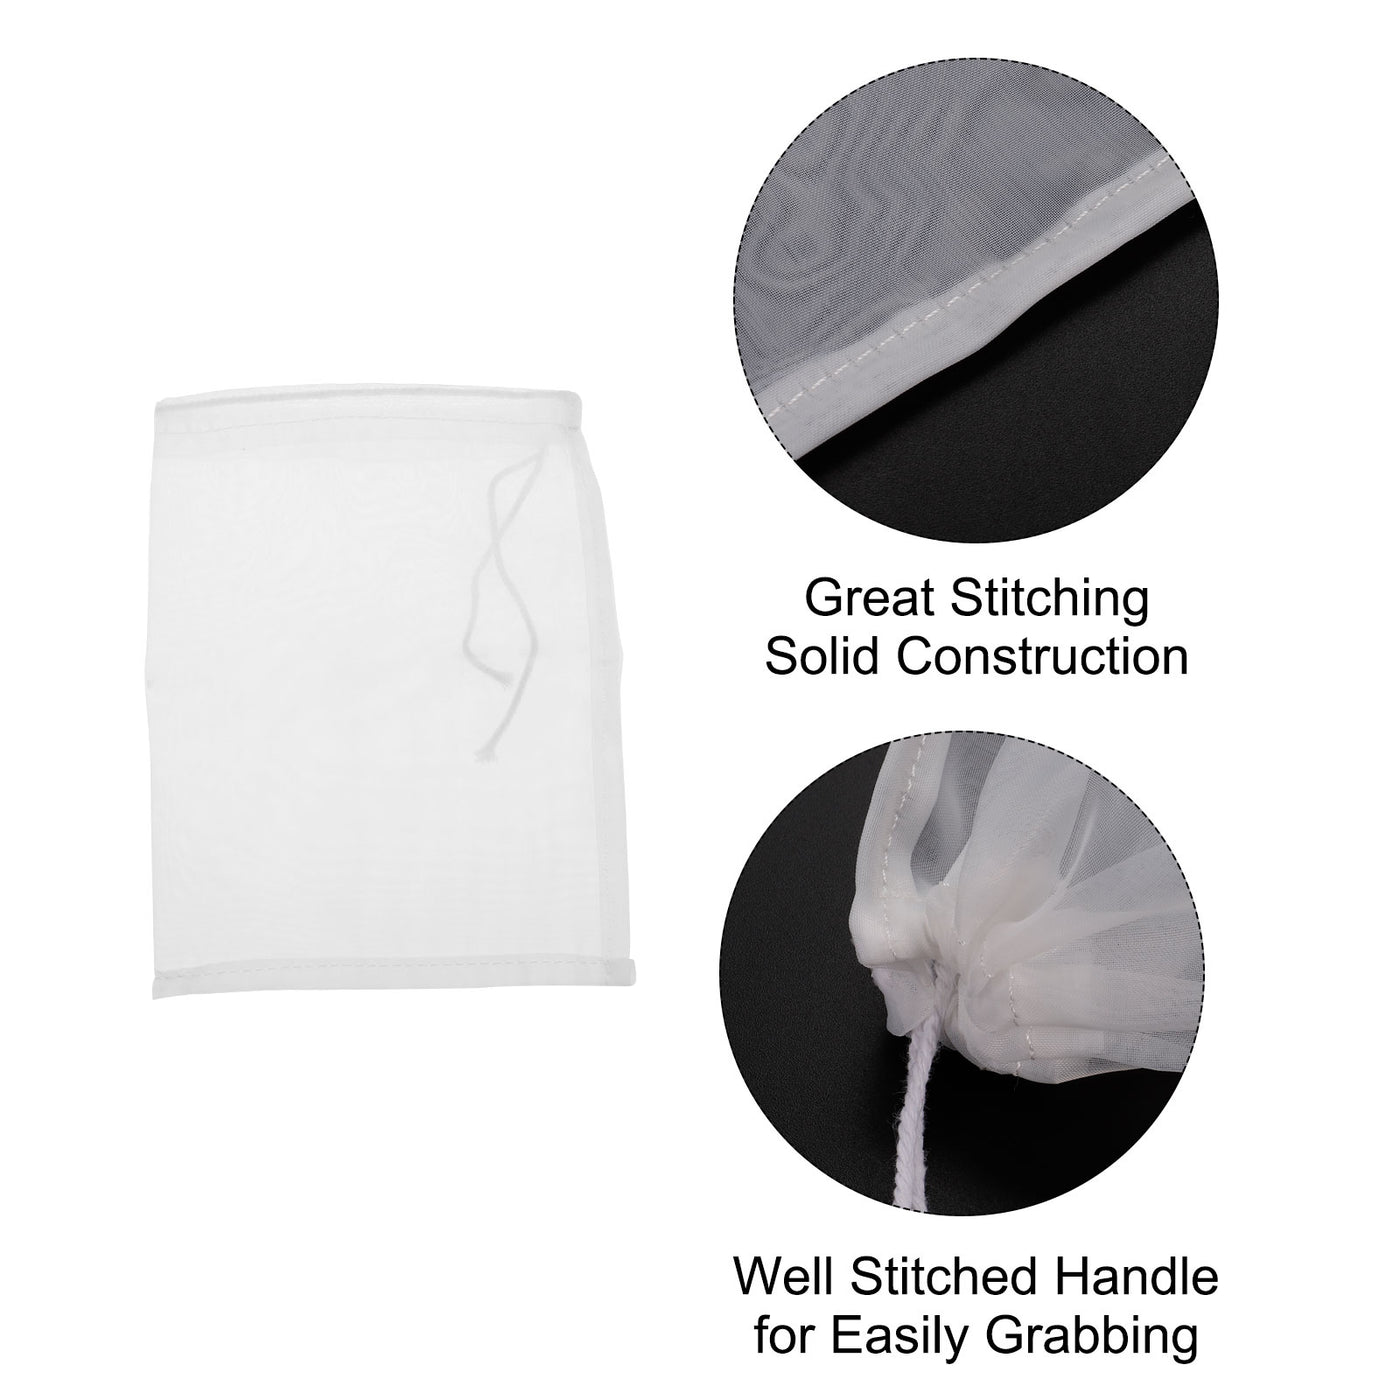 uxcell Uxcell Paint Filter Bag 100 Mesh (7.9"x5.9") Nylon Strainer for Filtering Paint